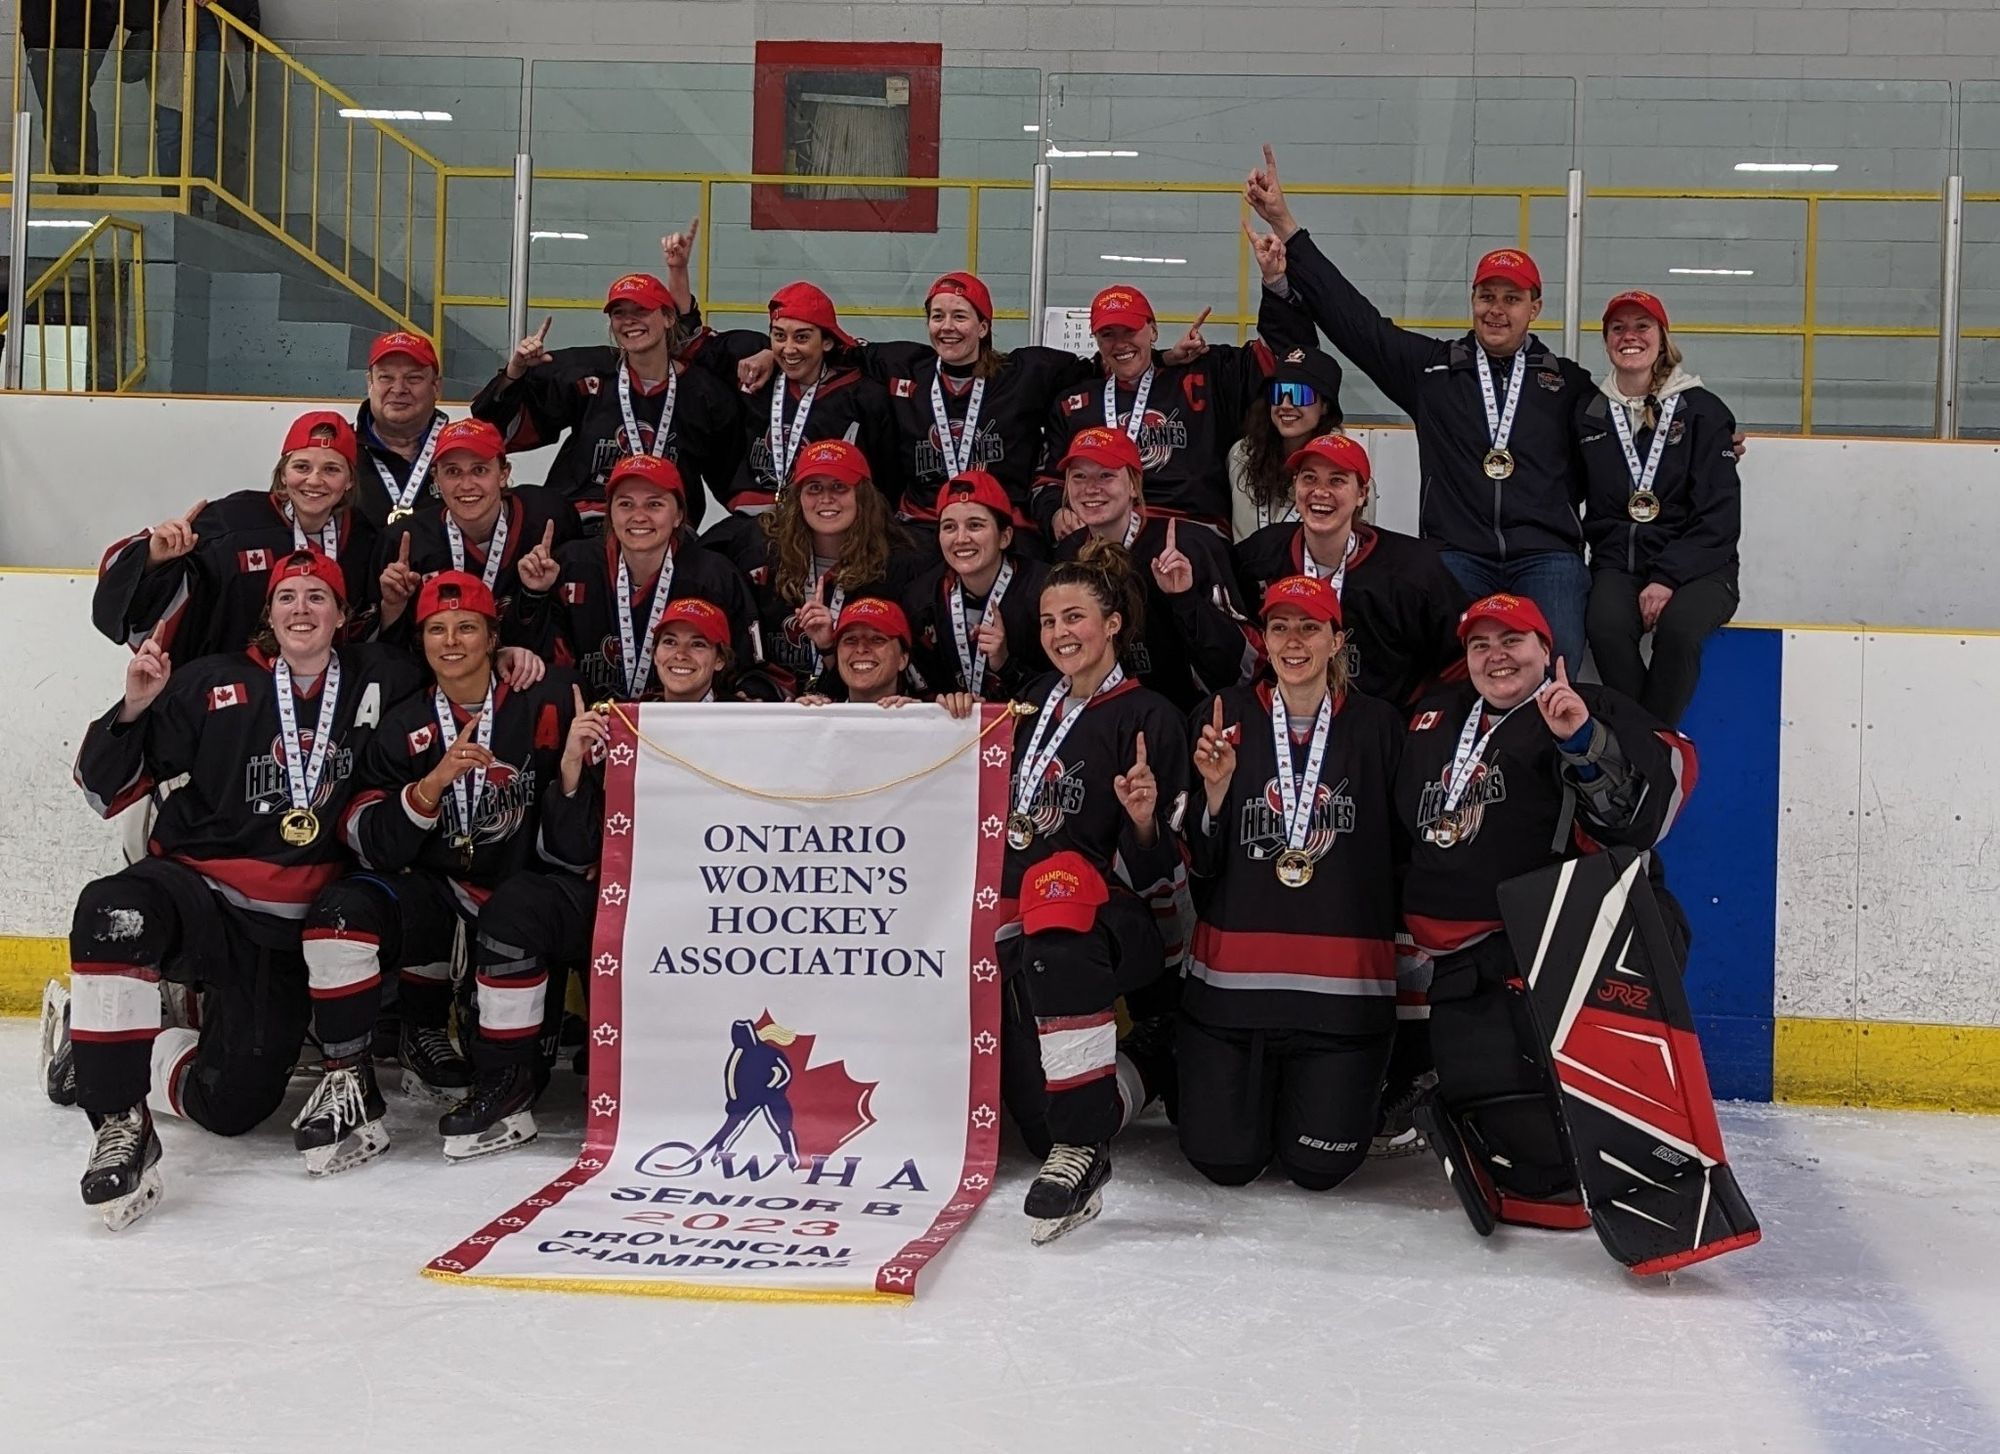                      Twin Centre Hericanes senior squad caps great season with OWHA title                             
                     